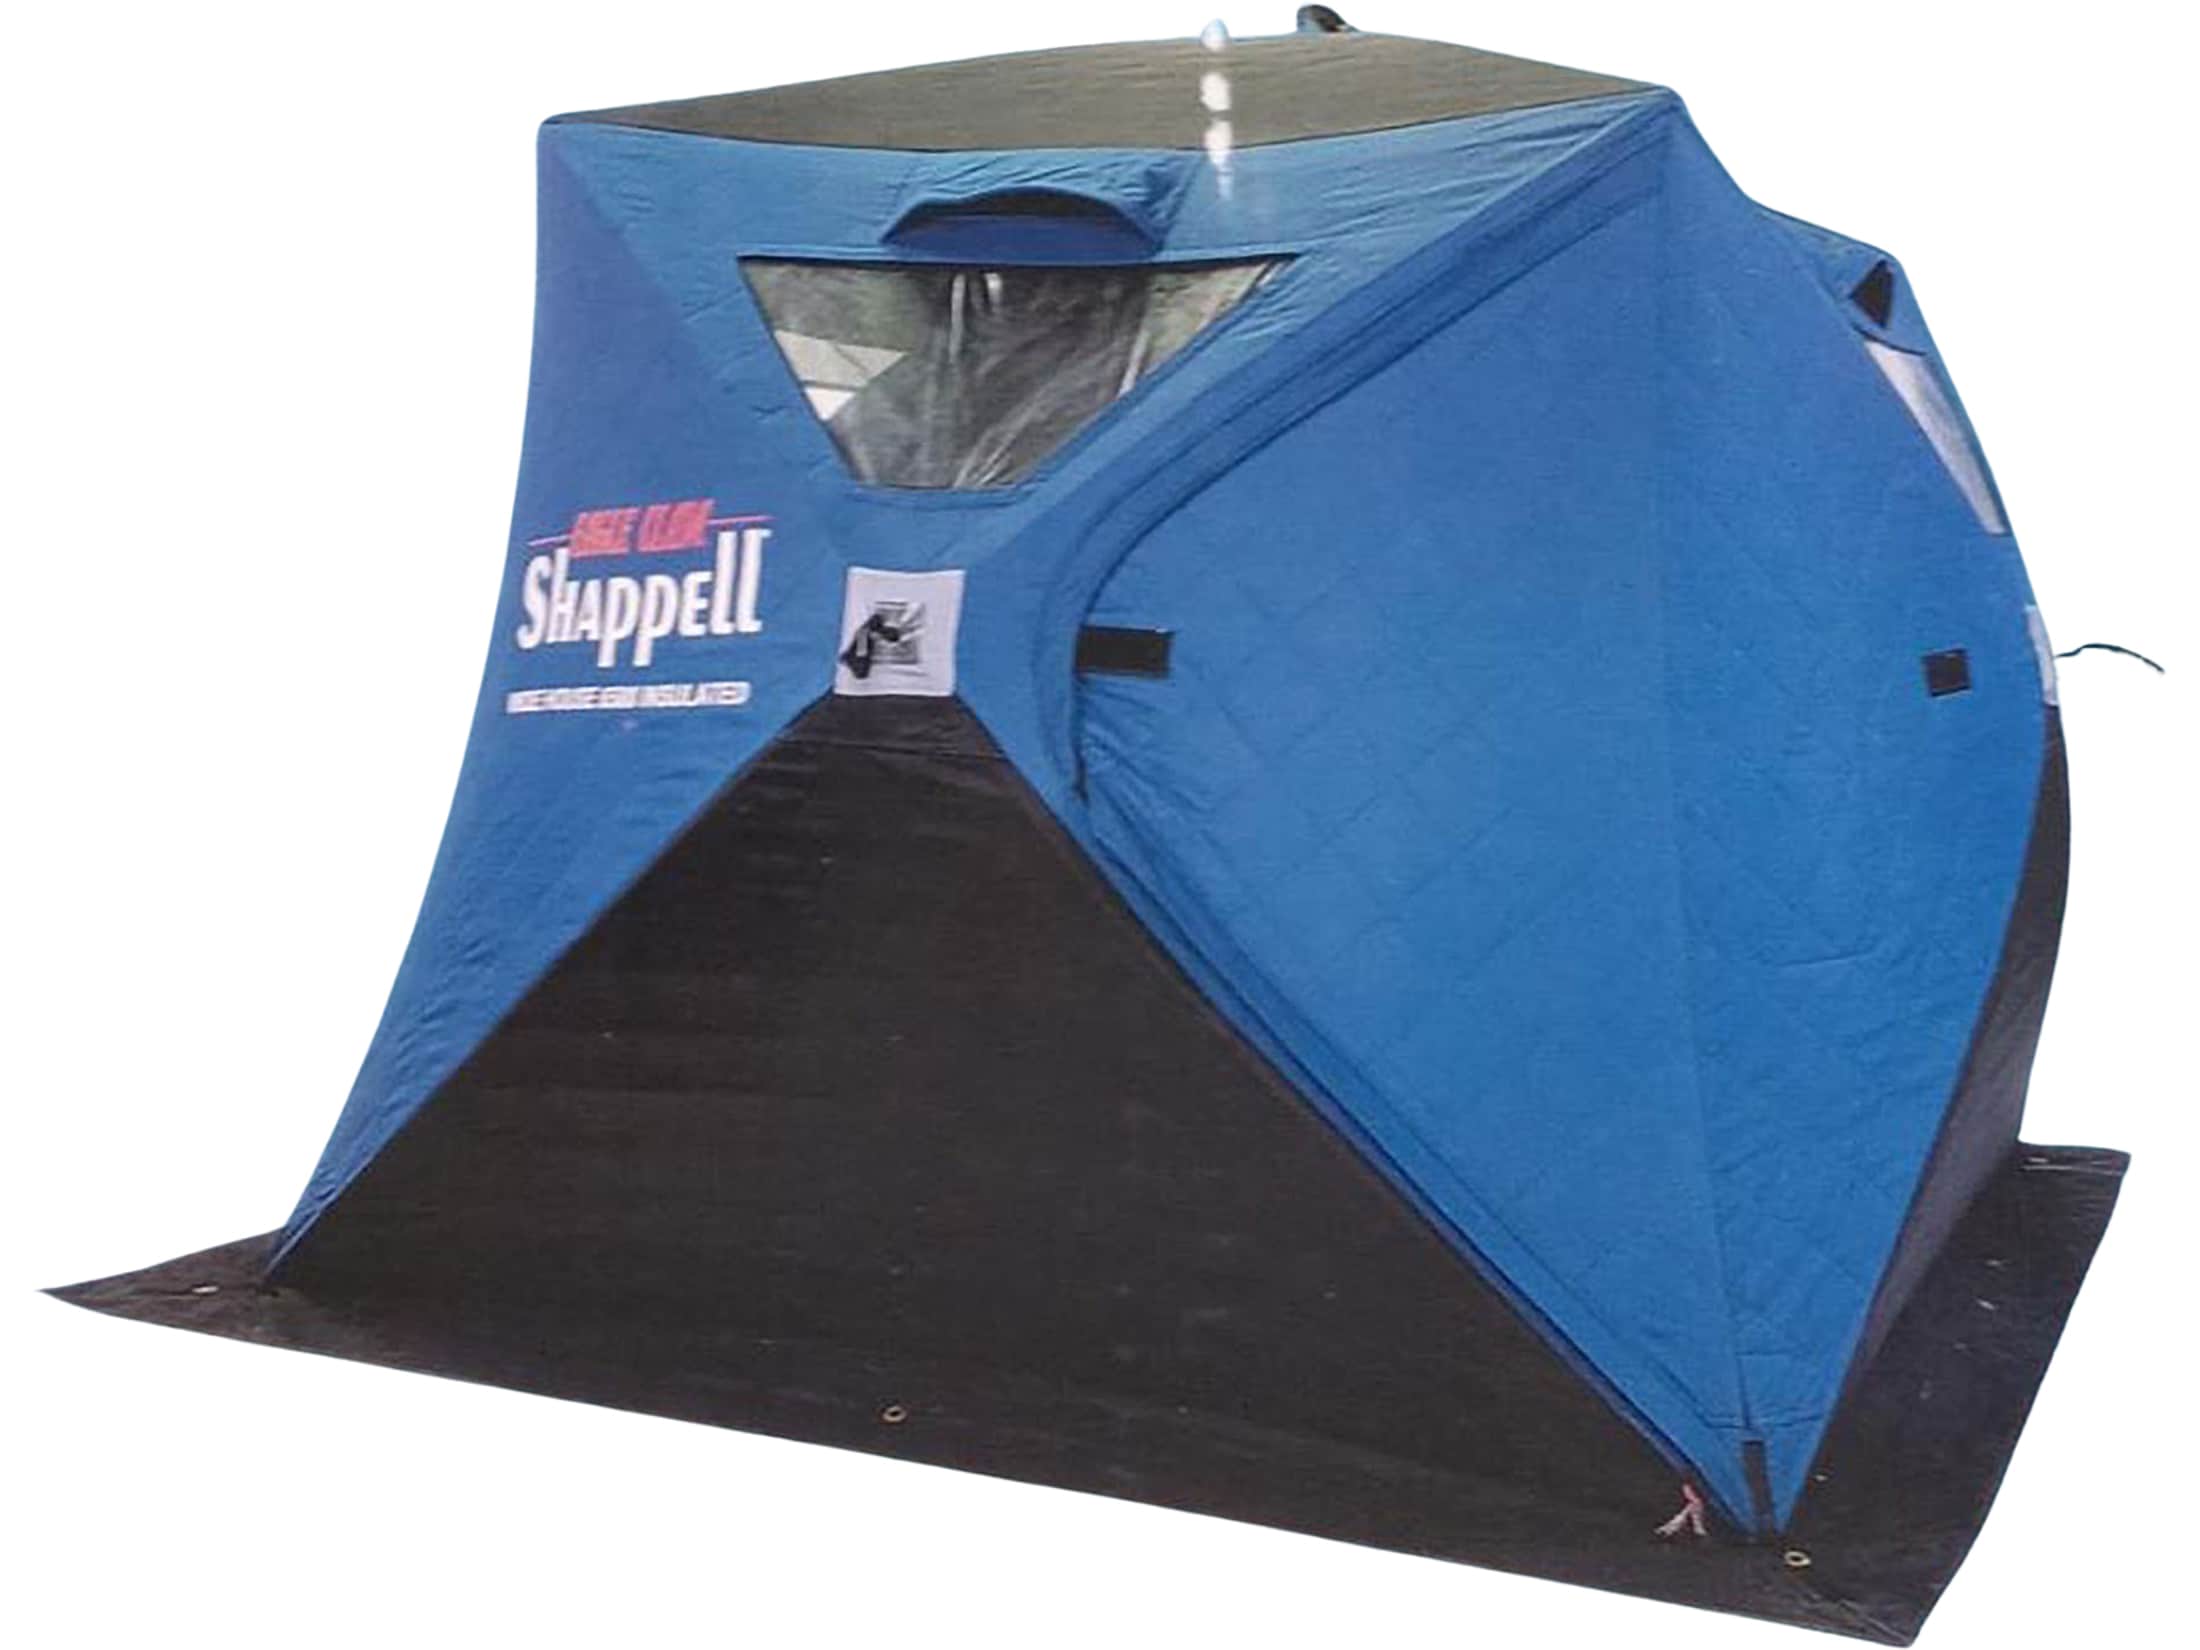 Shappell Wide House 6500 Insulated Ice Fishing Shelter